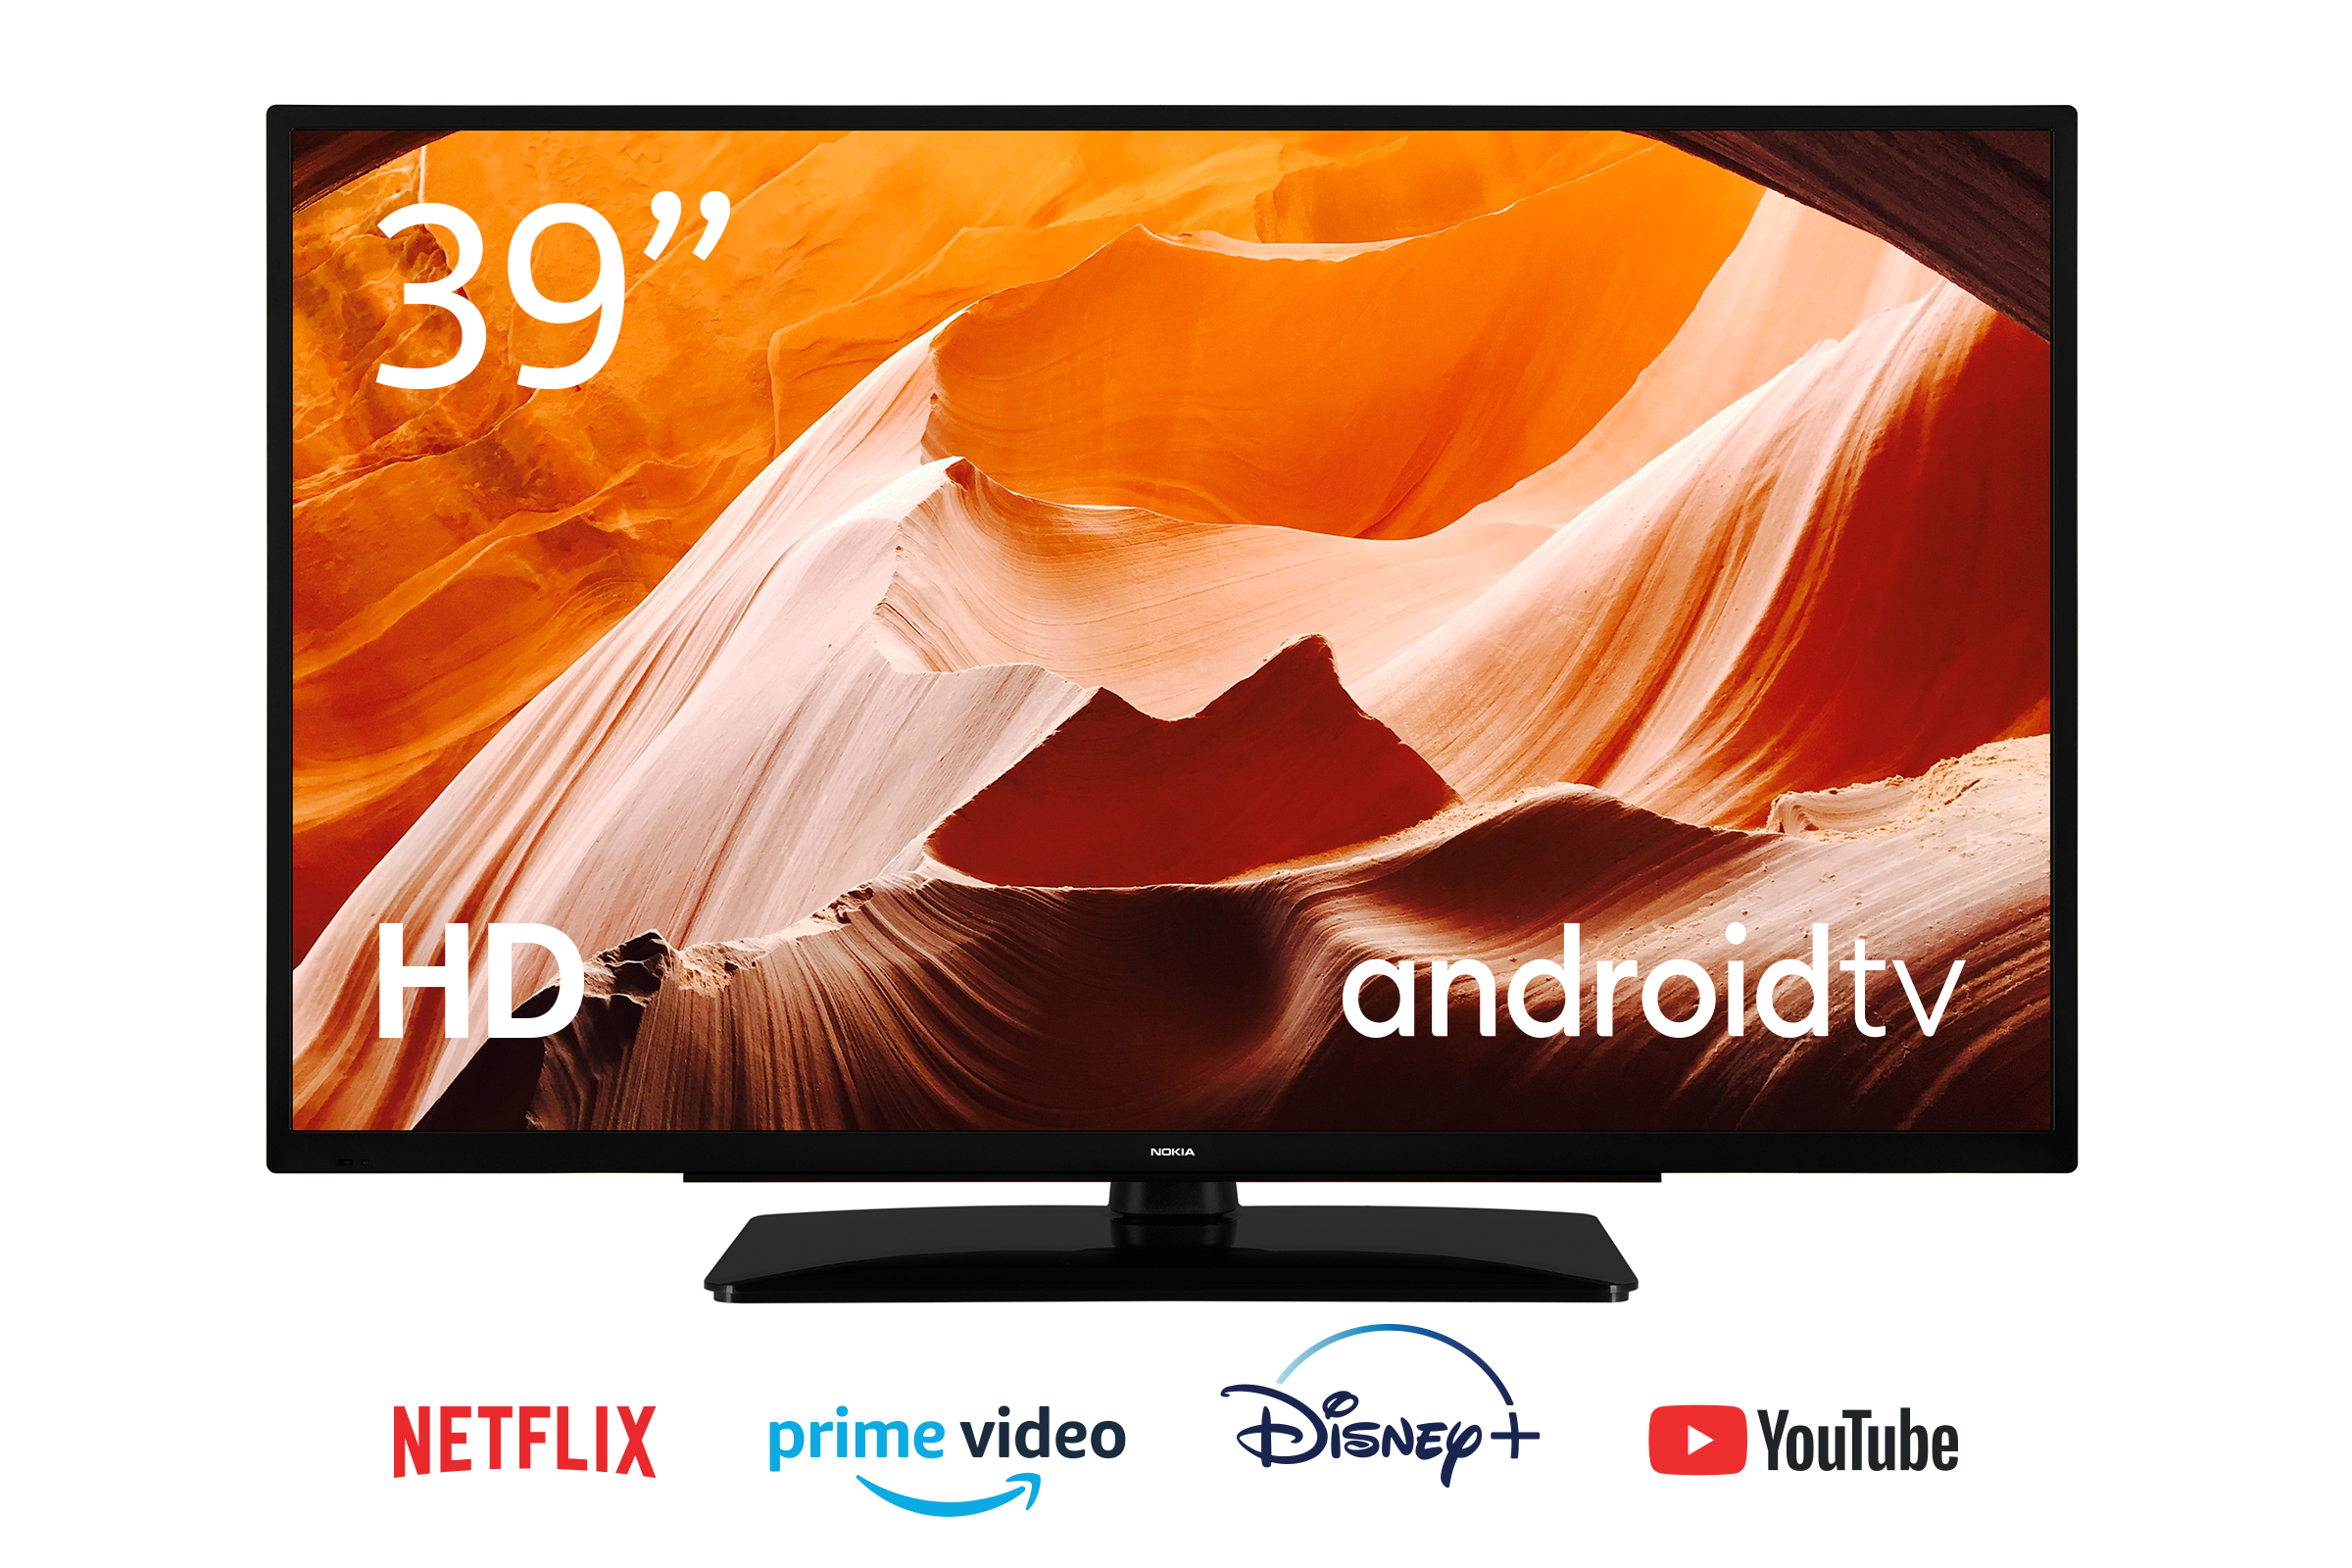 Nokia 39“ HD Smart TV on Android TV